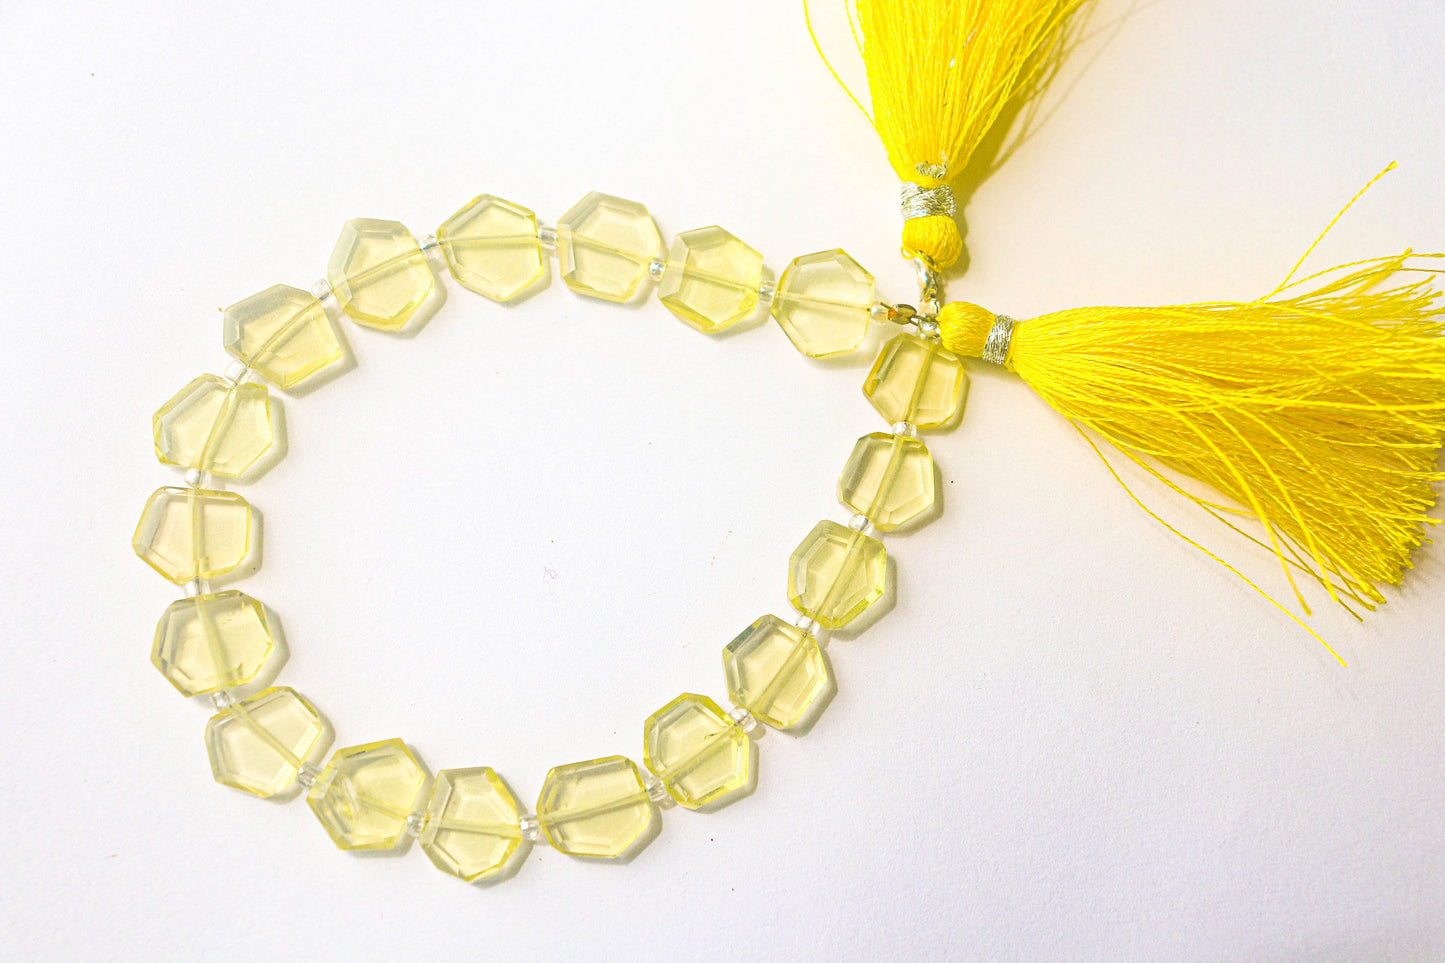 Lemon Quartz Fancy Crown Cut Beads, 9x10mm to 10x12mm, 18 Pieces, 8 Inch String, Natural Gemstone Beads, Beadsforyourjewellery